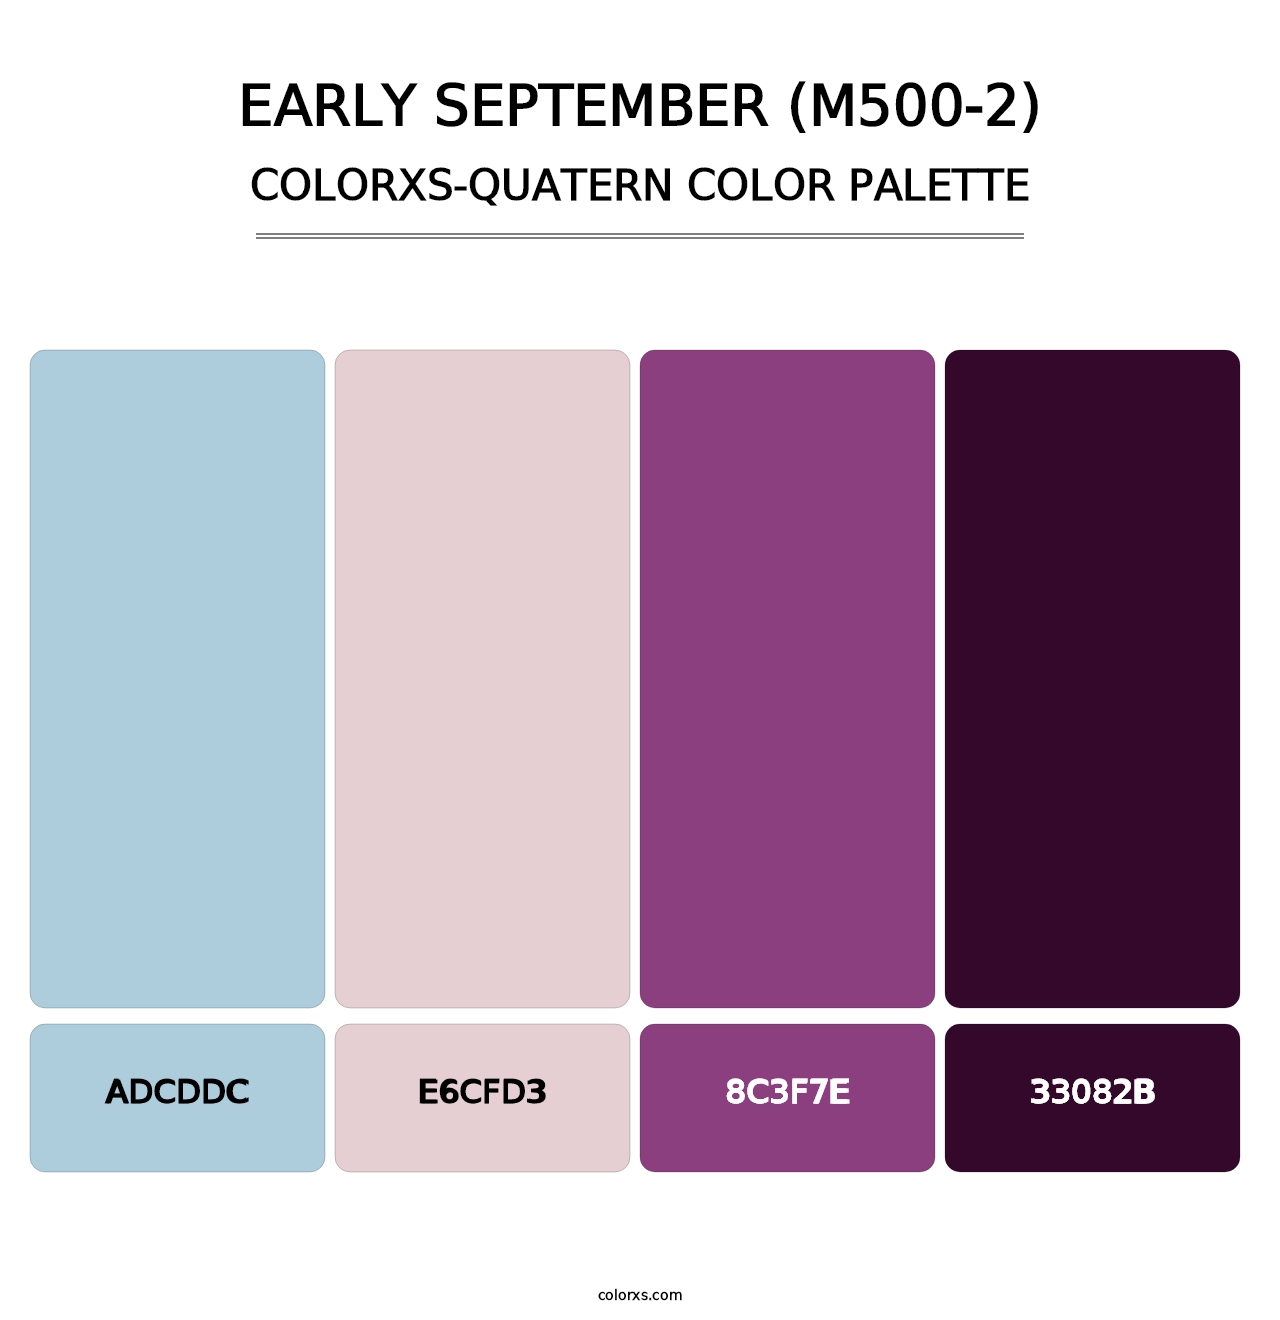 Early September (M500-2) - Colorxs Quatern Palette